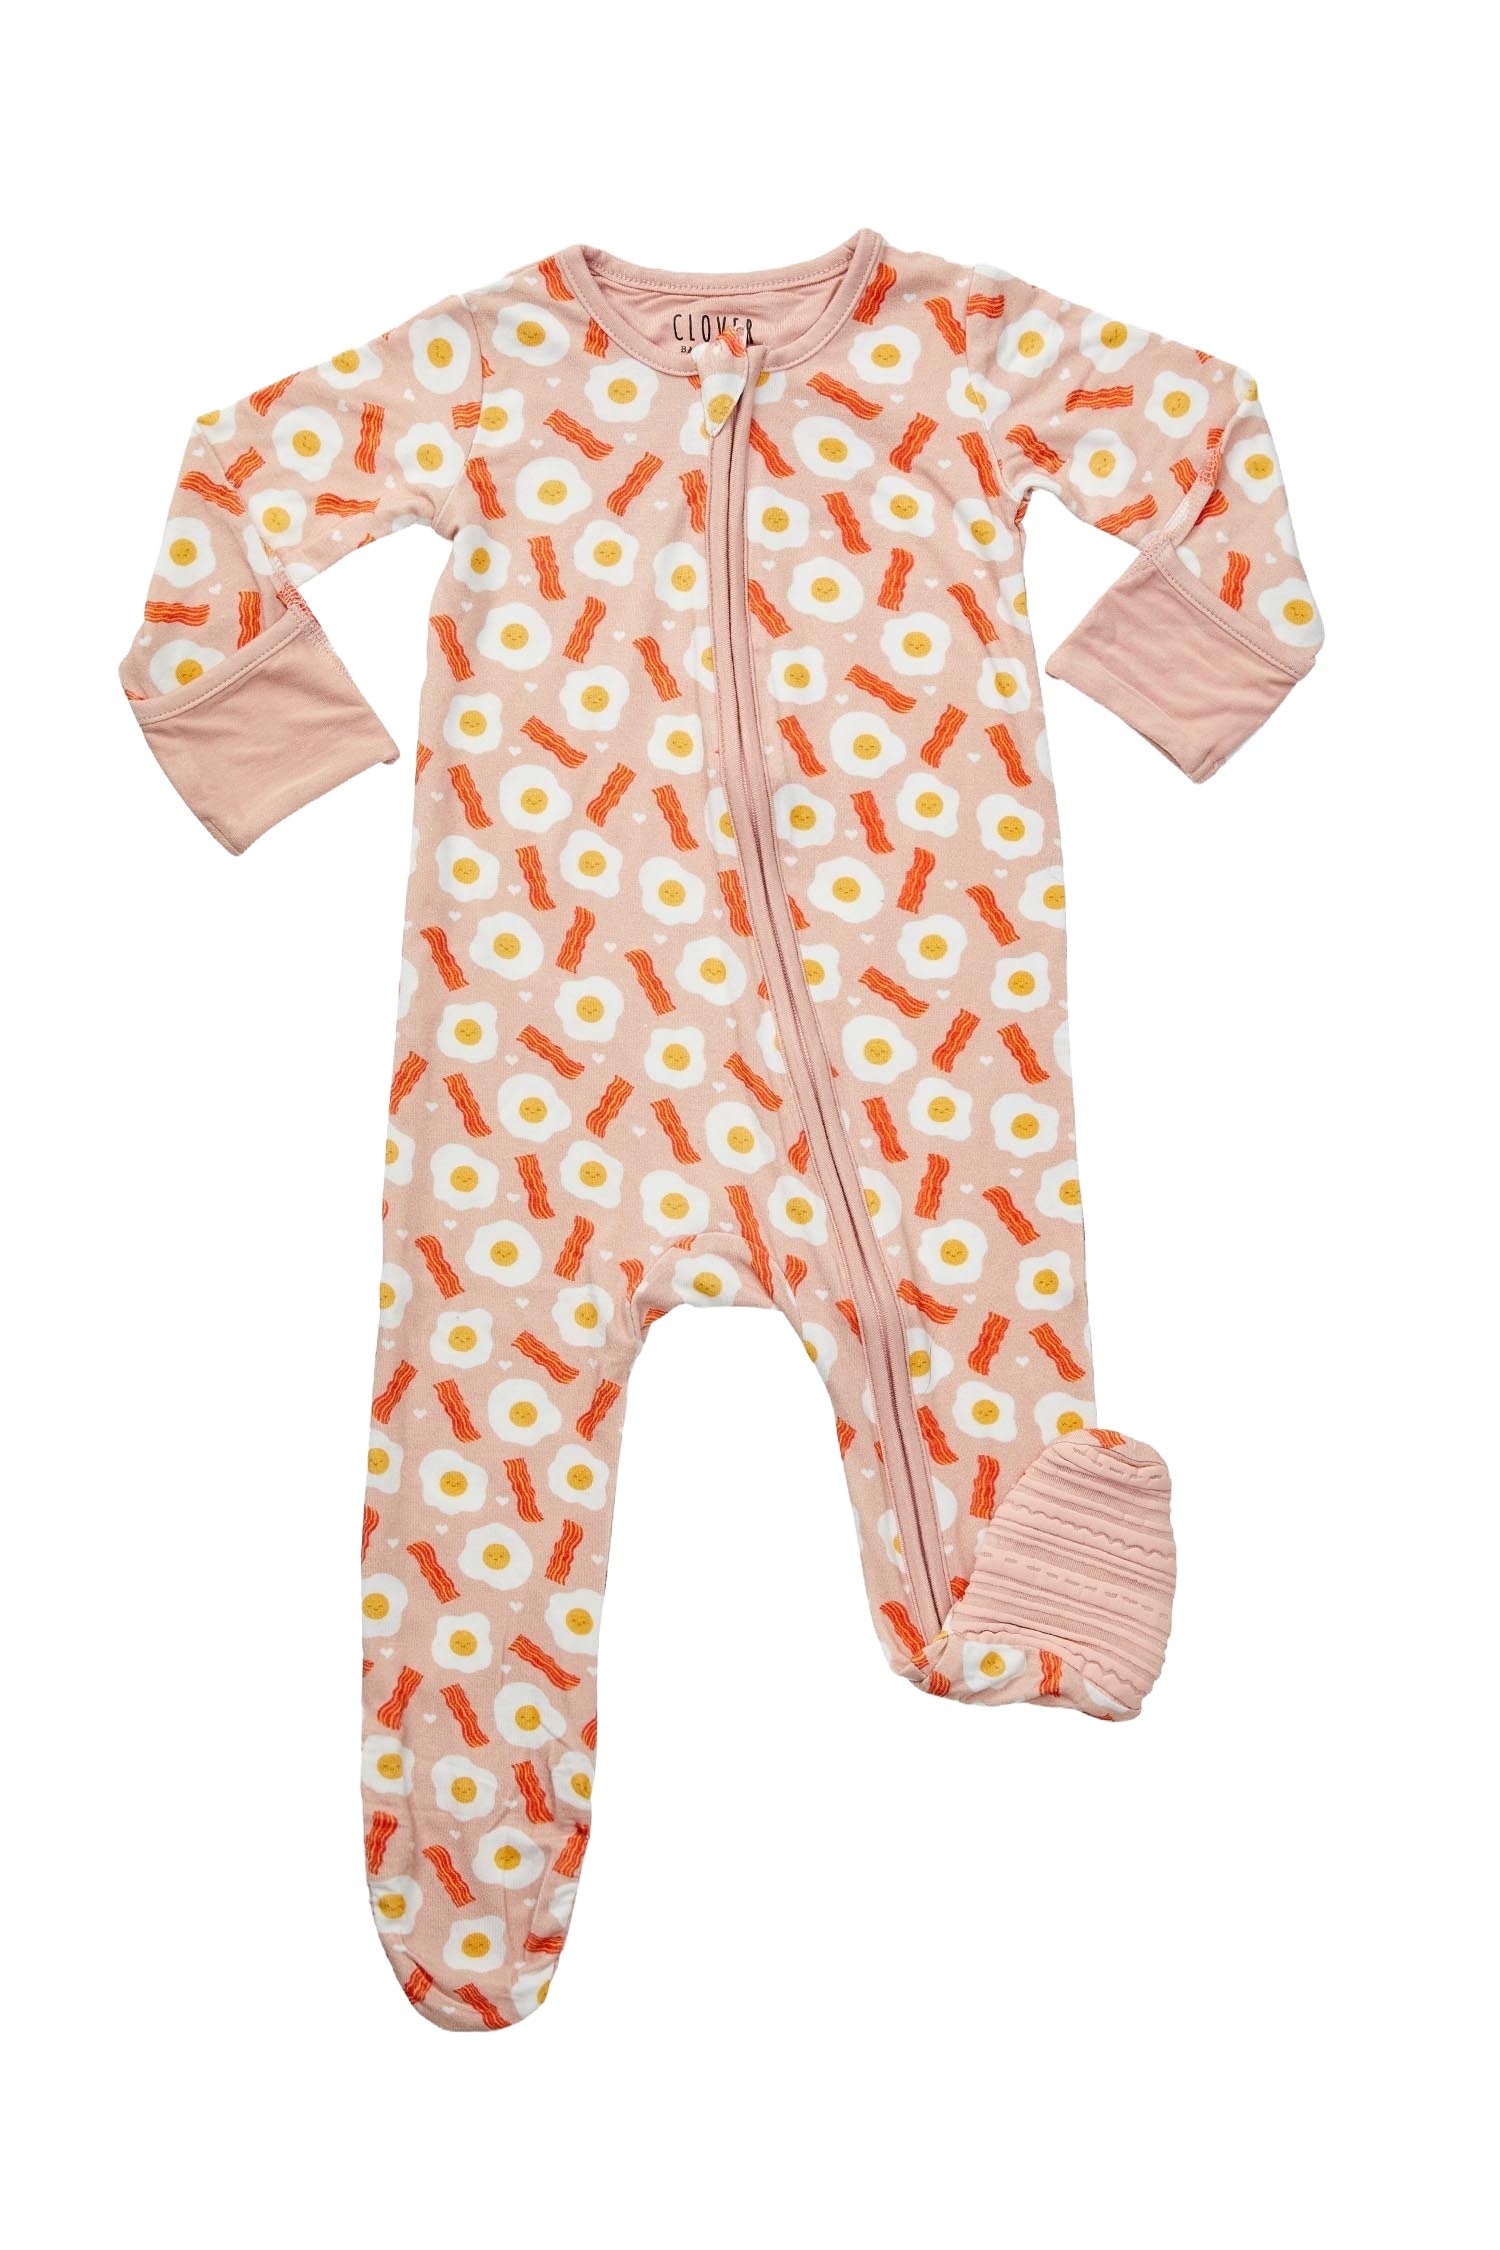 Soft & Stretchy Zipper Footie - Bacon & Eggs Pink